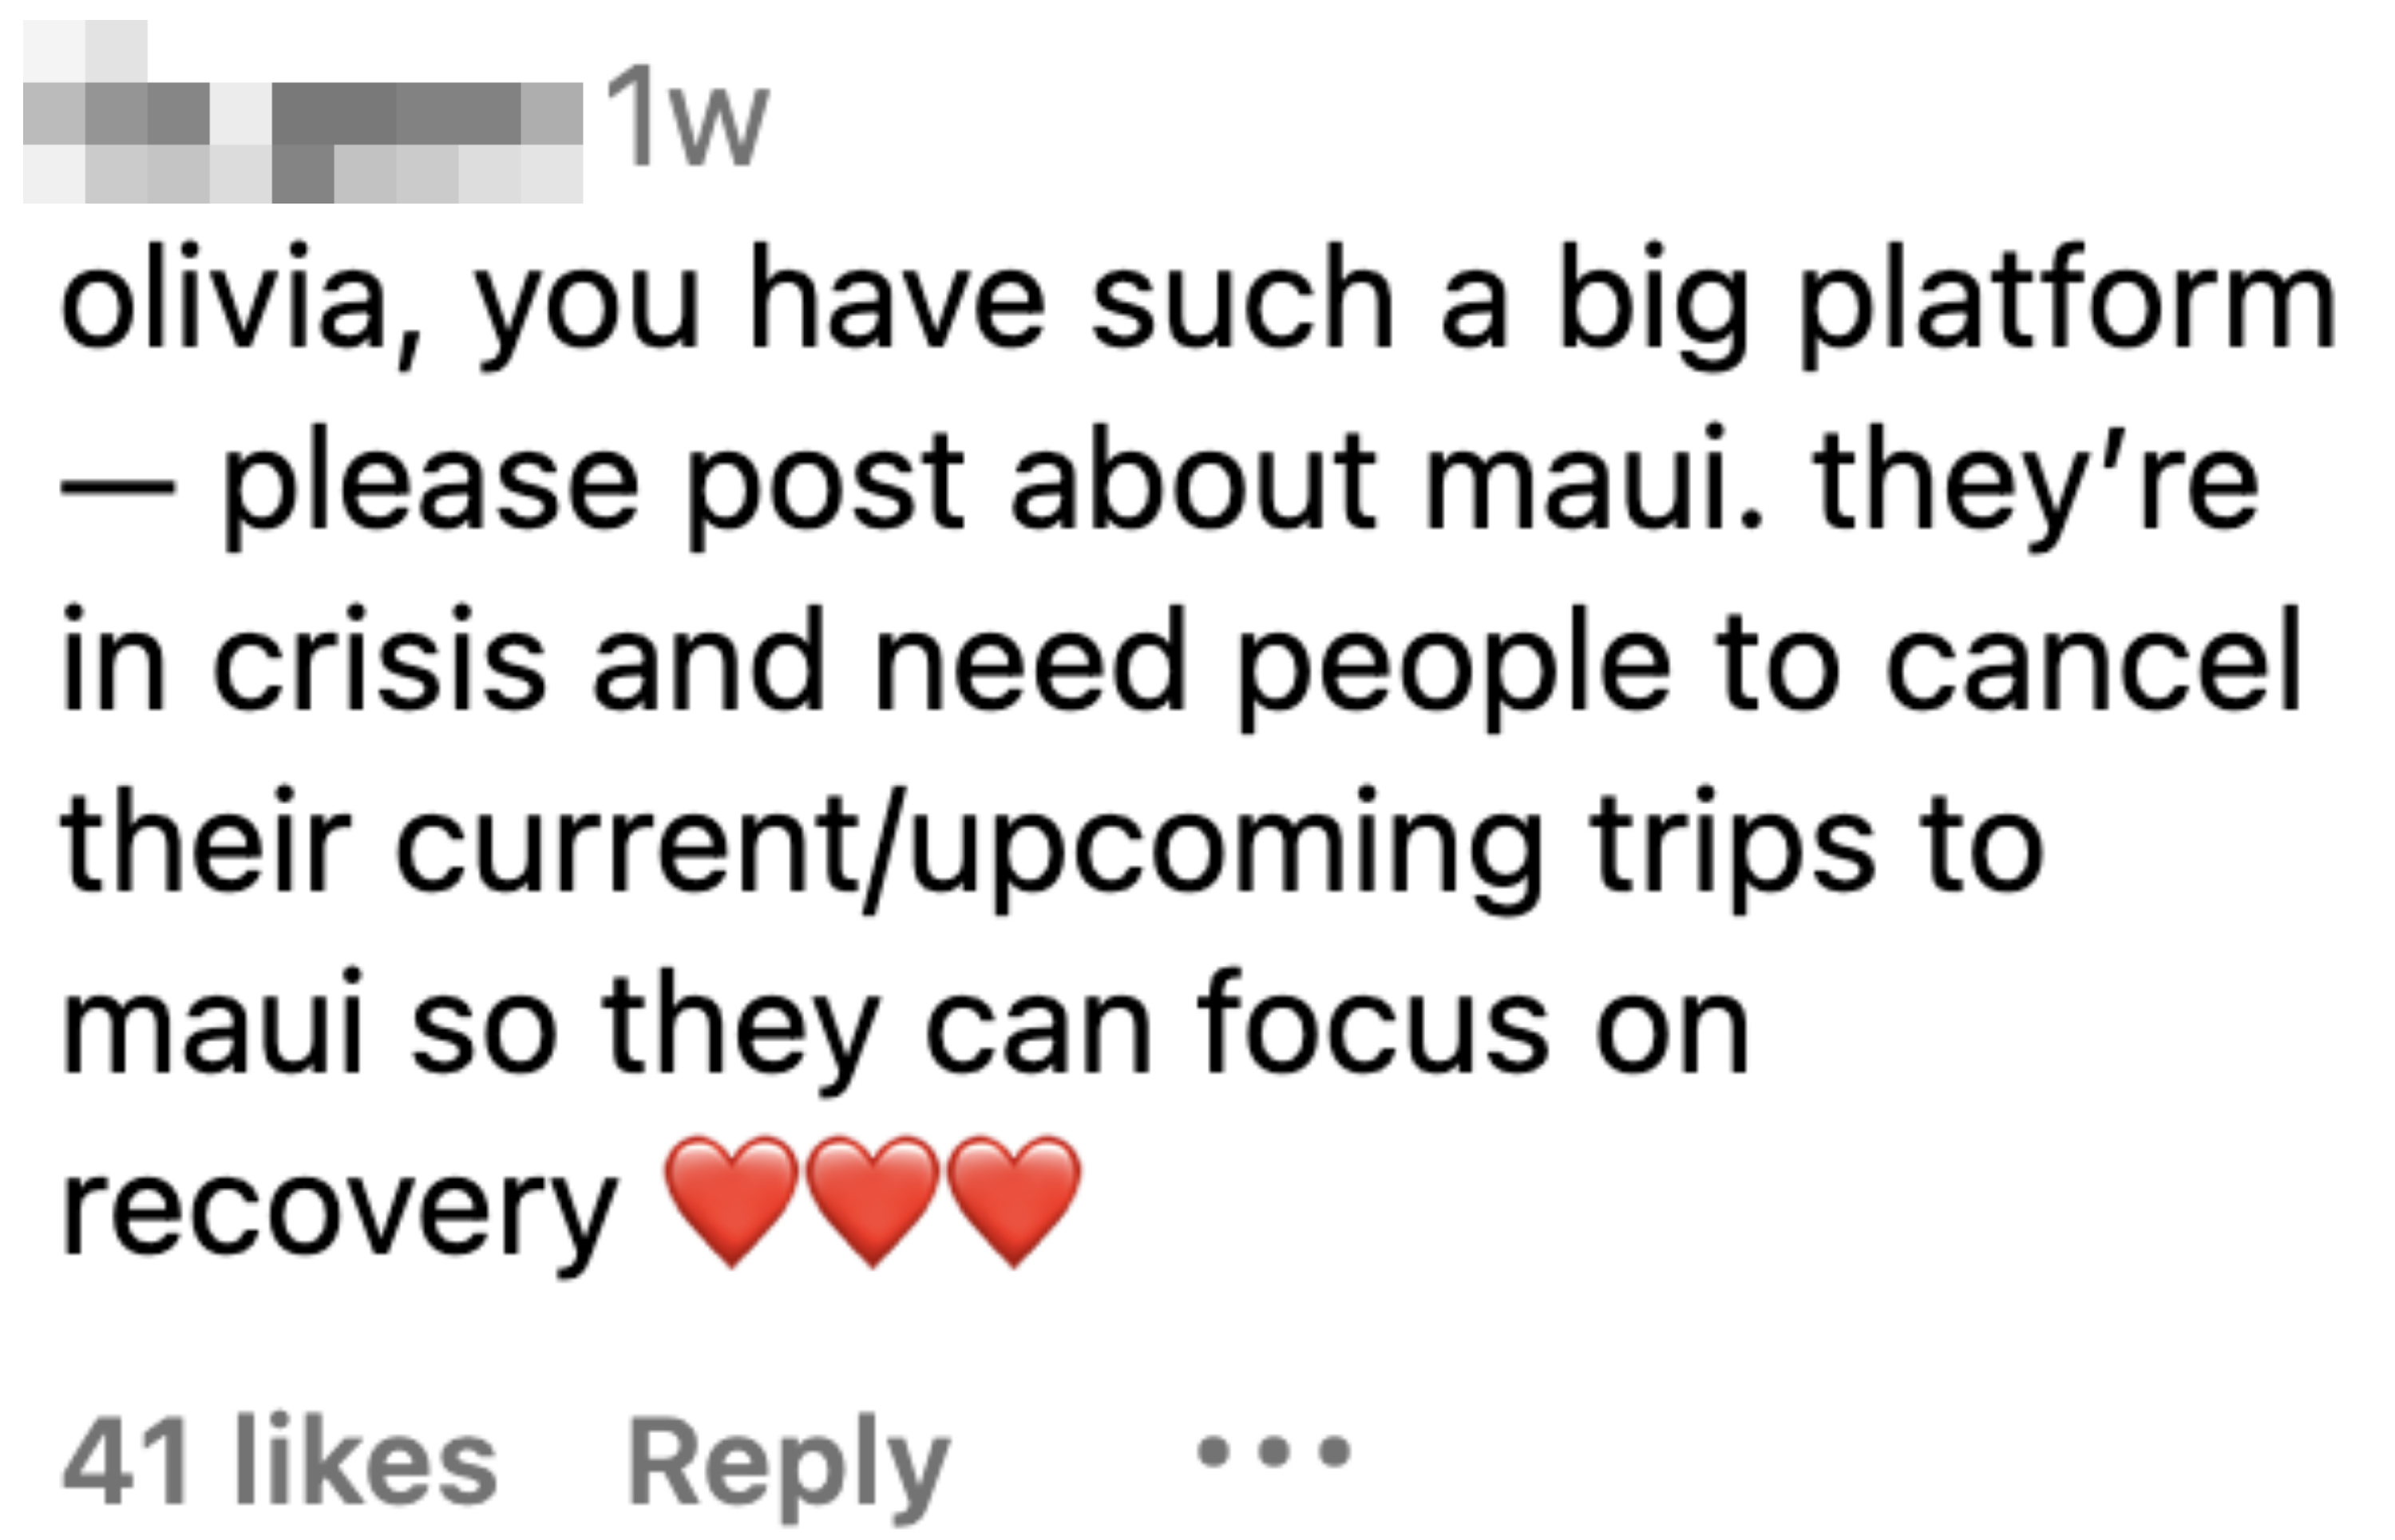 &quot;You have such a big platform — please post about Maui; they&#x27;re in crisis and need people to cancel their current/upcoming trips so they can focus on recovery&quot;